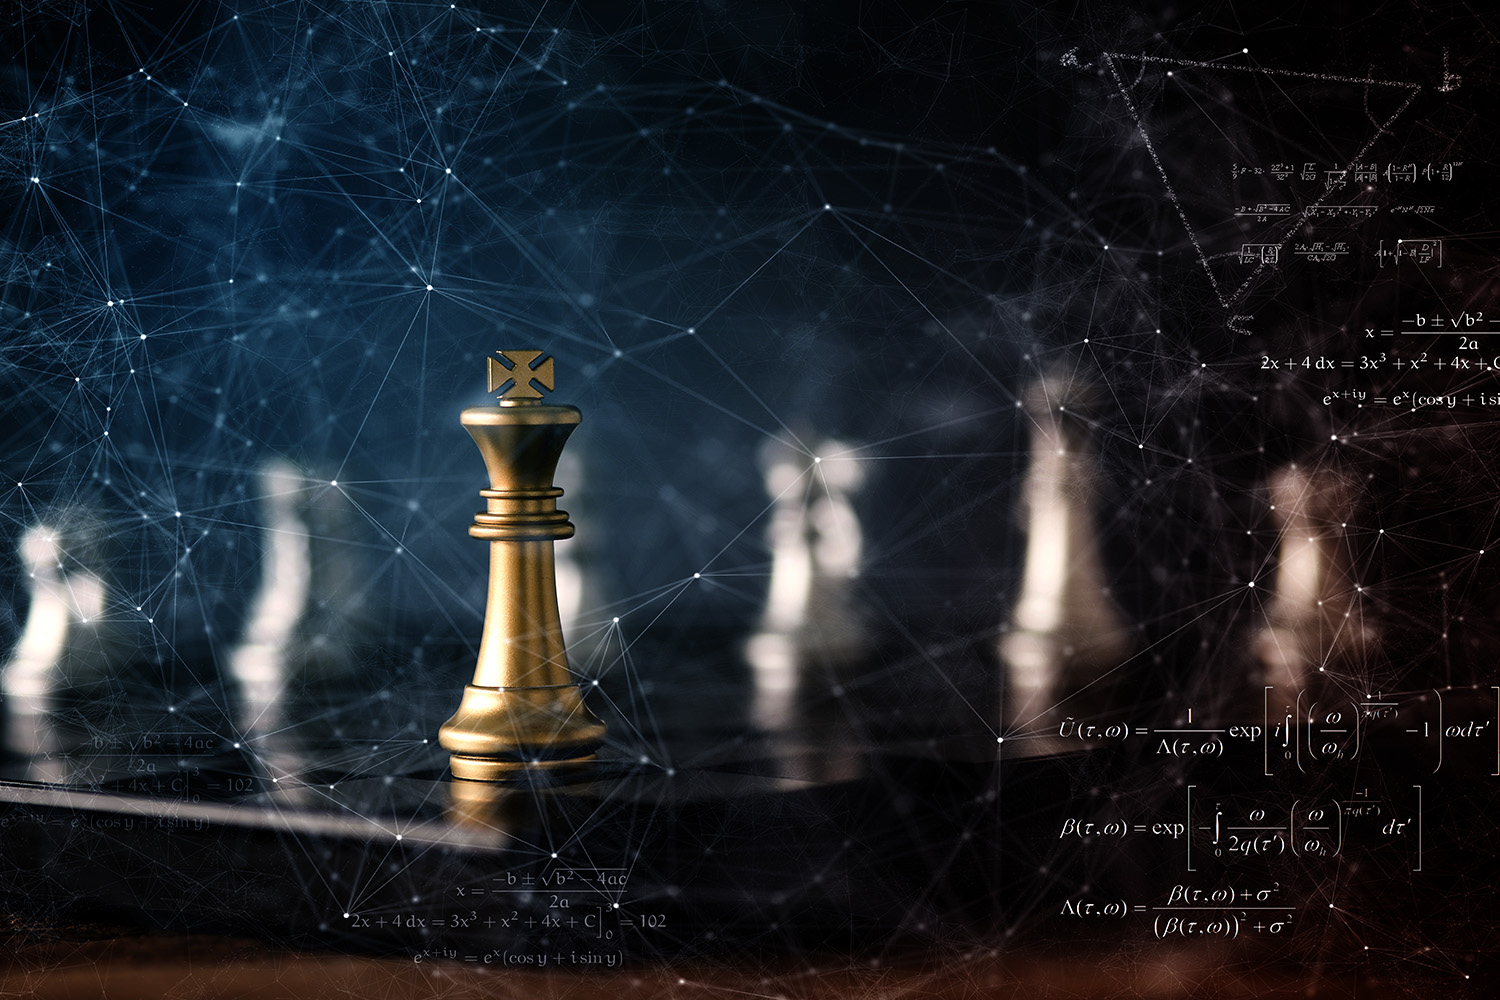 Chess pieces on a dark background with faint mathematical formulas written on it